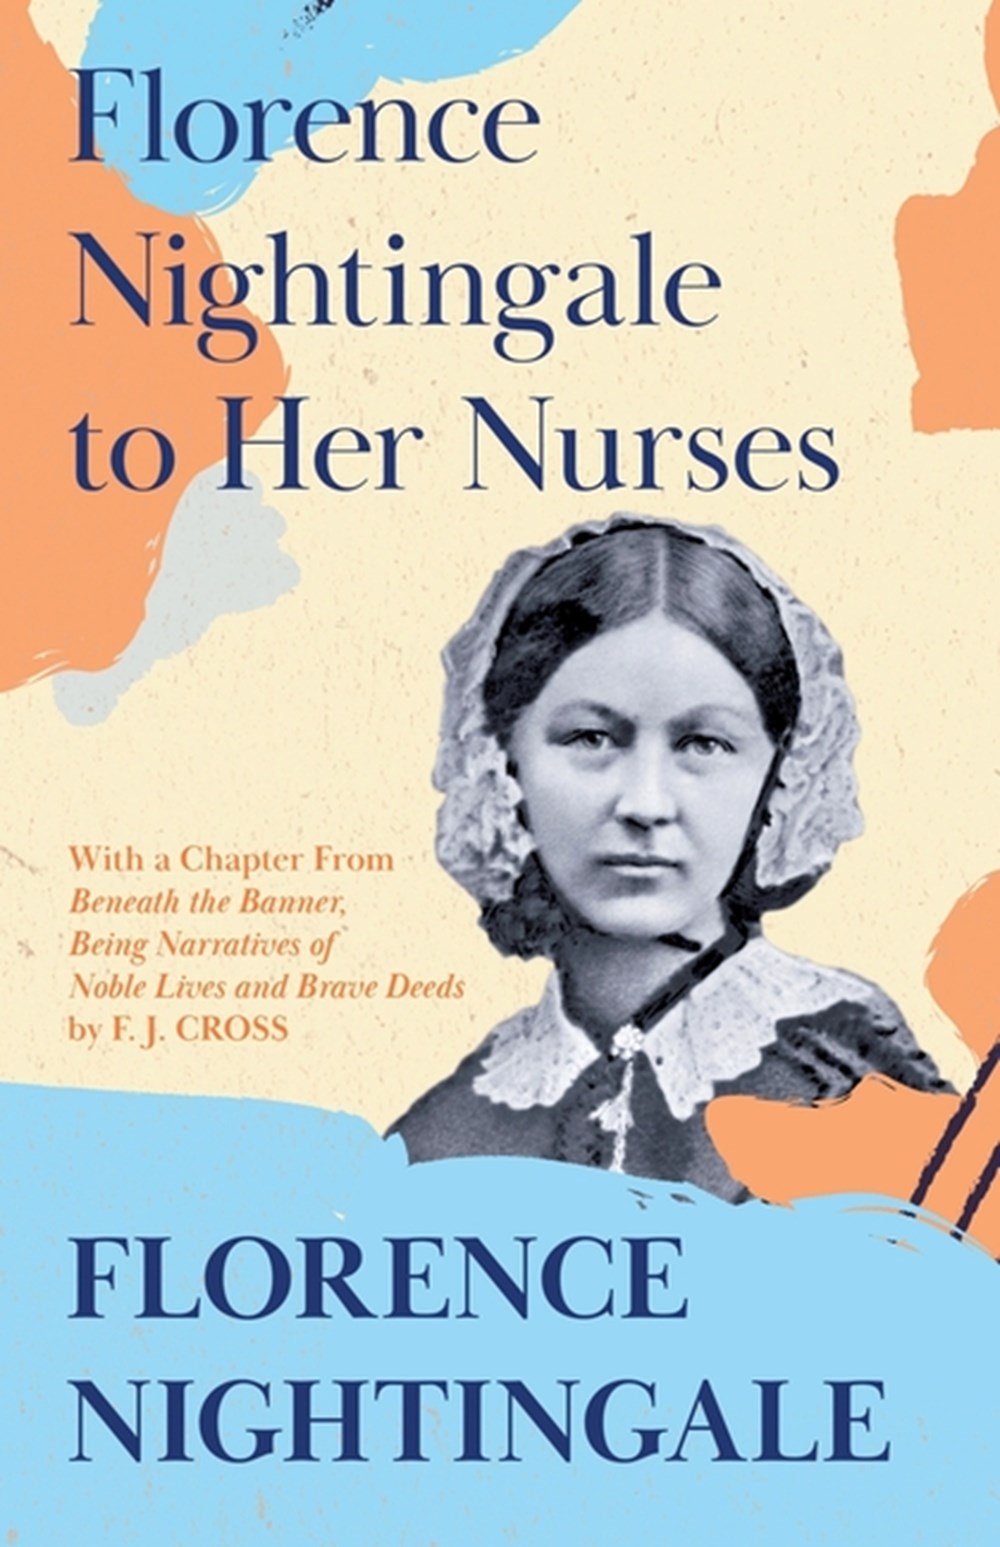 Florence Nightingale to Her Nurses: With a Chapter From 'Beneath the Banner, Being Narratives of Nob